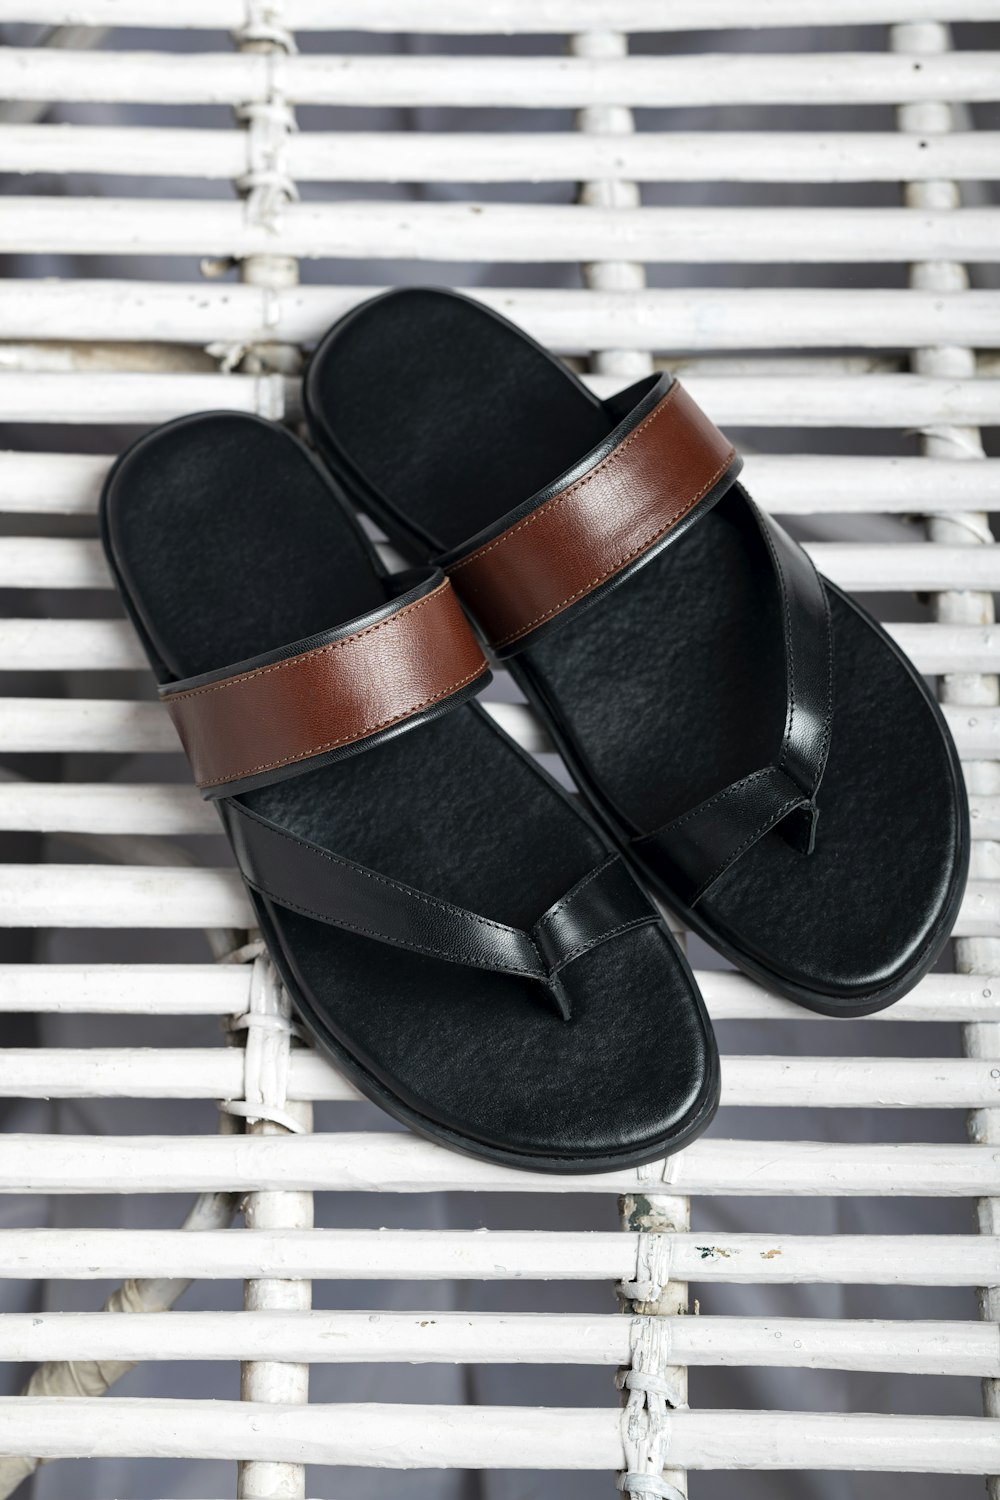 black and brown leather sandals